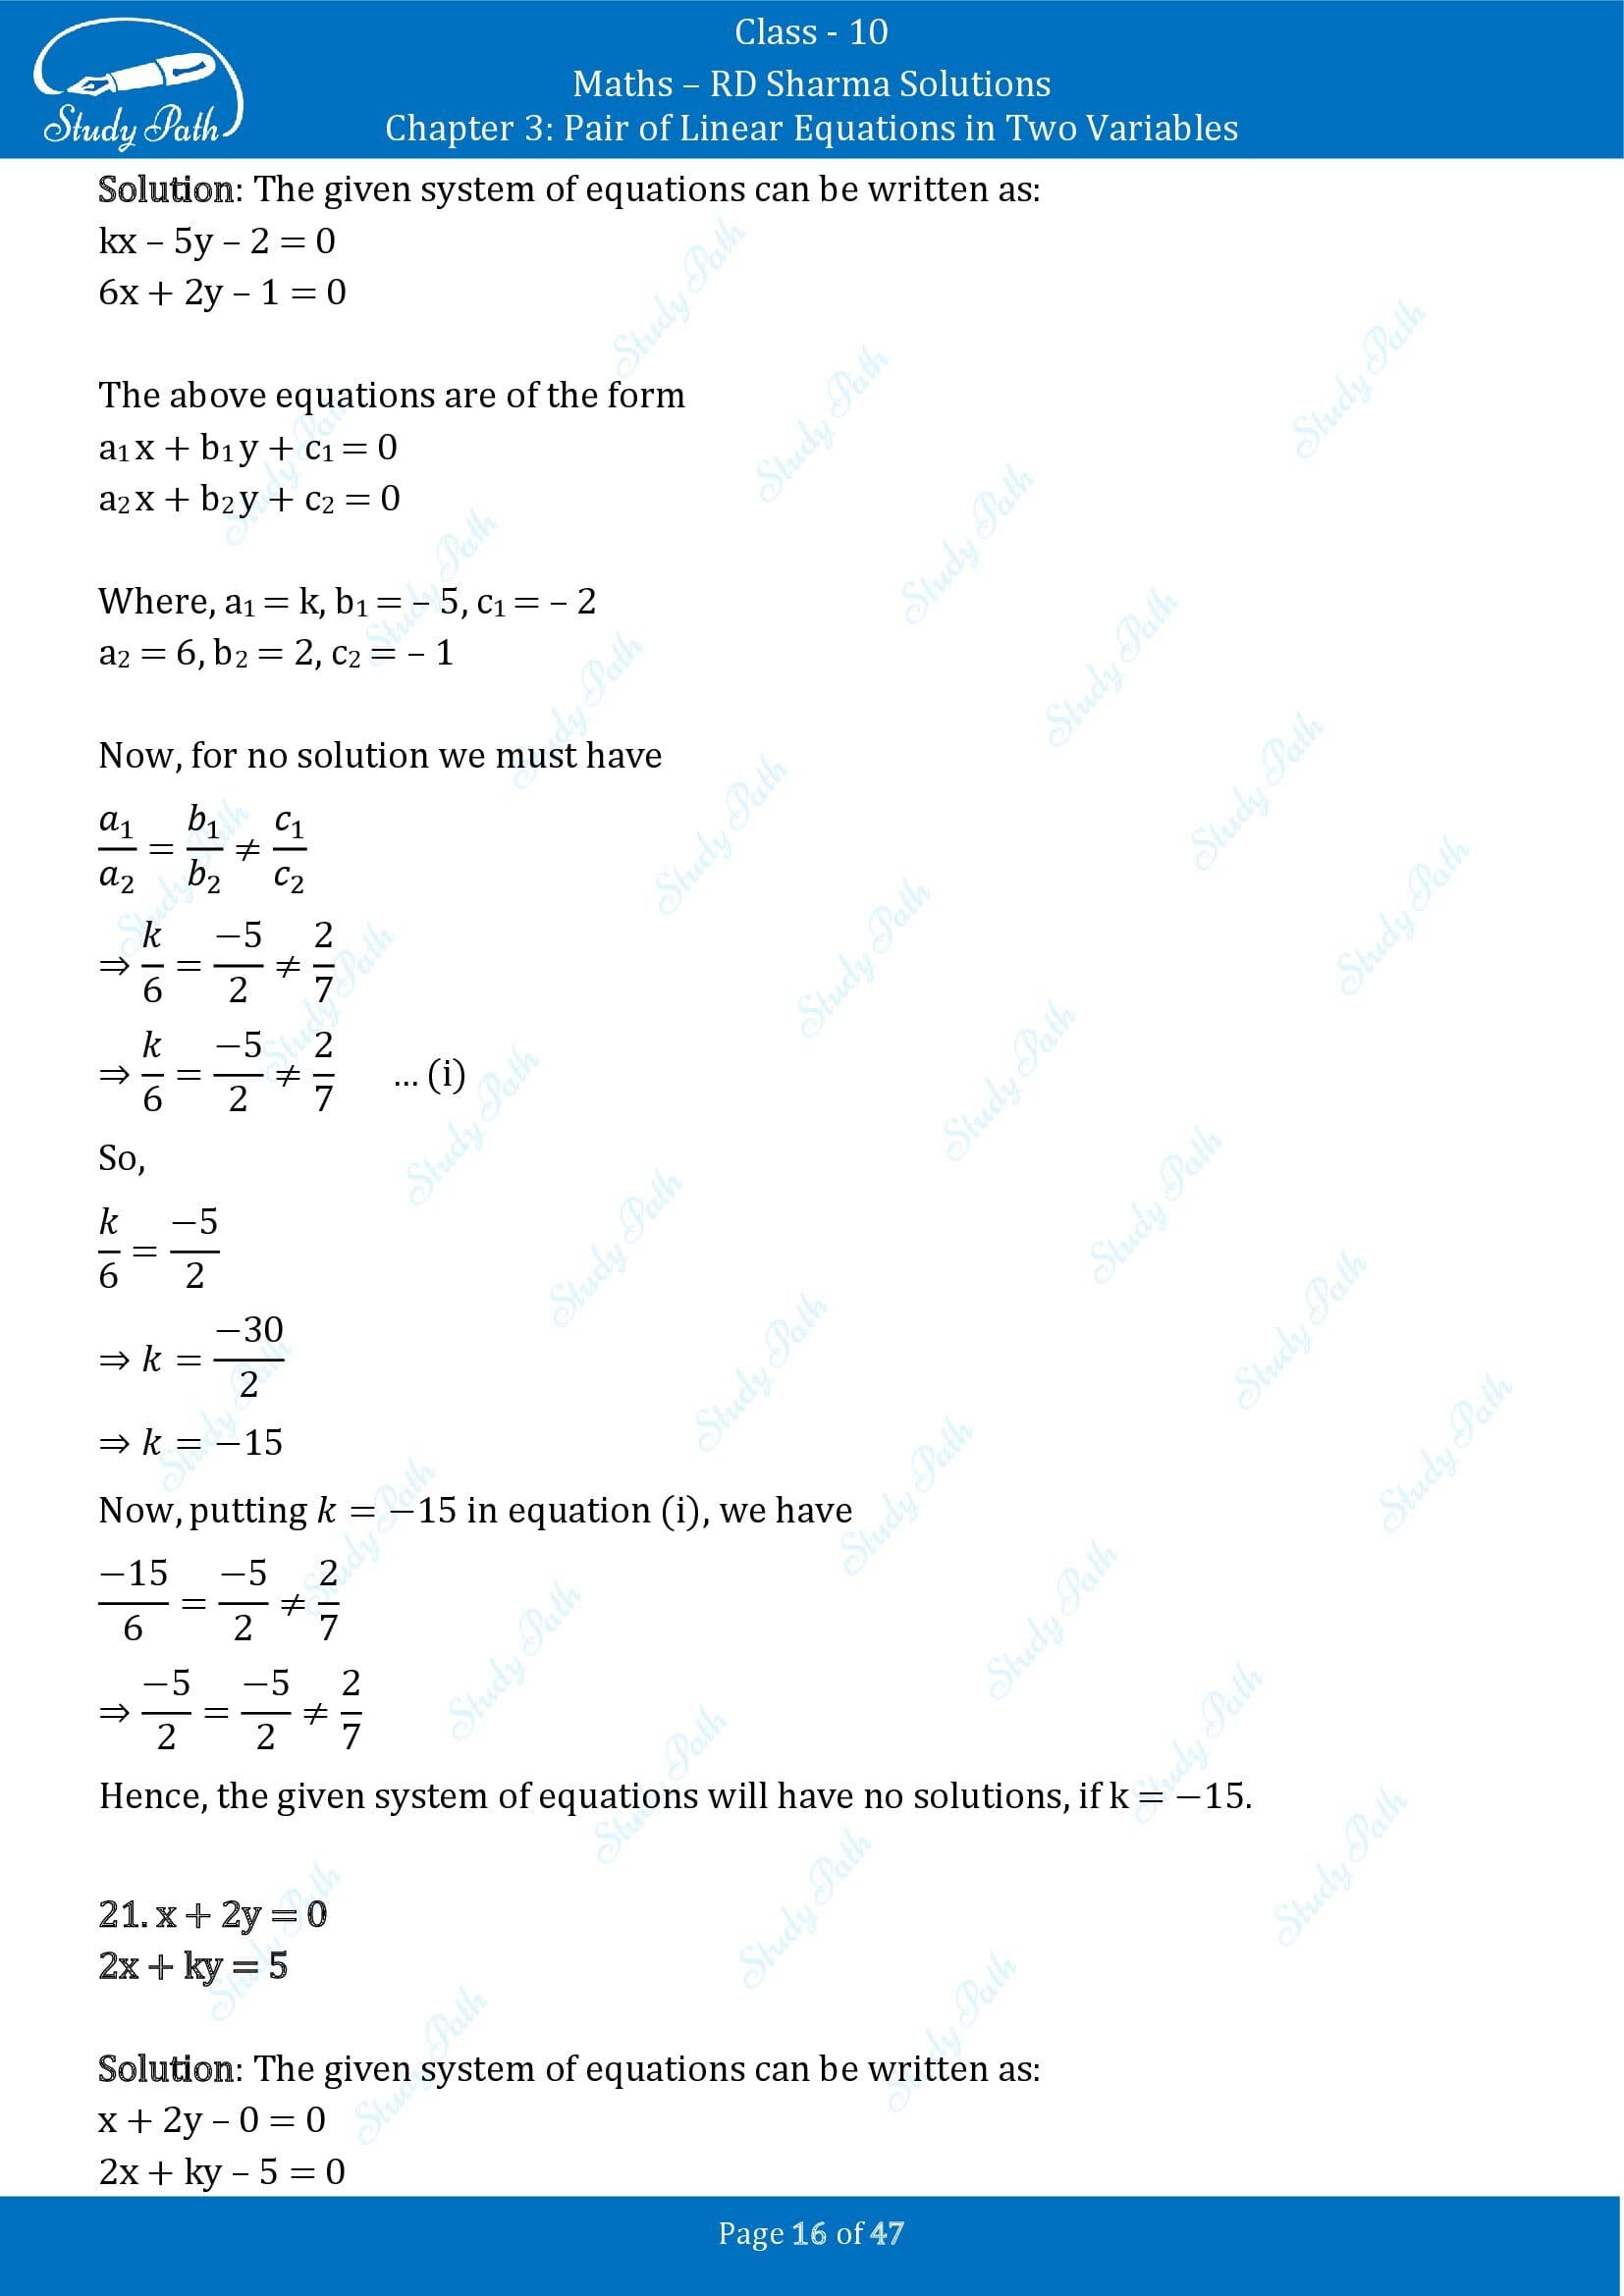 RD Sharma Solutions Class 10 Chapter 3 Pair of Linear Equations in Two Variables Exercise 3.5 00016